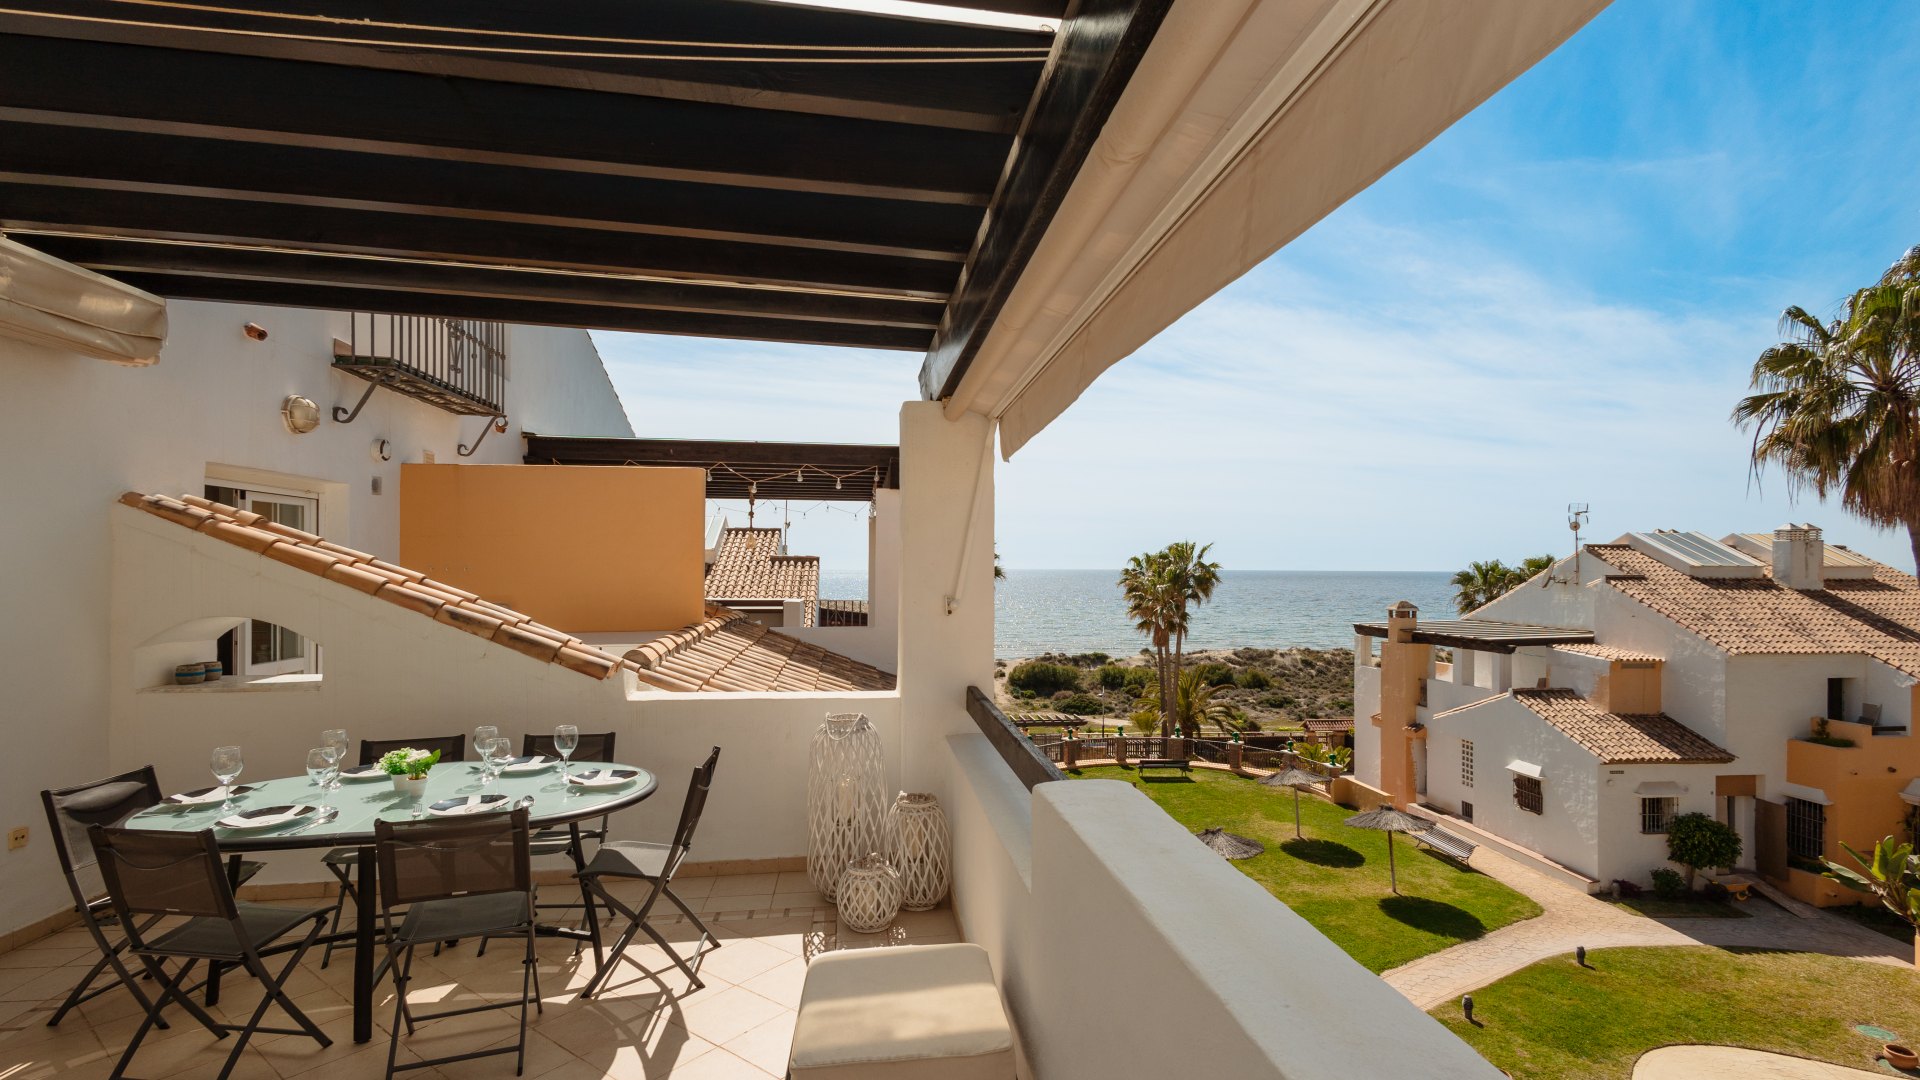 Holiday home with direct access to the beach in Marbella